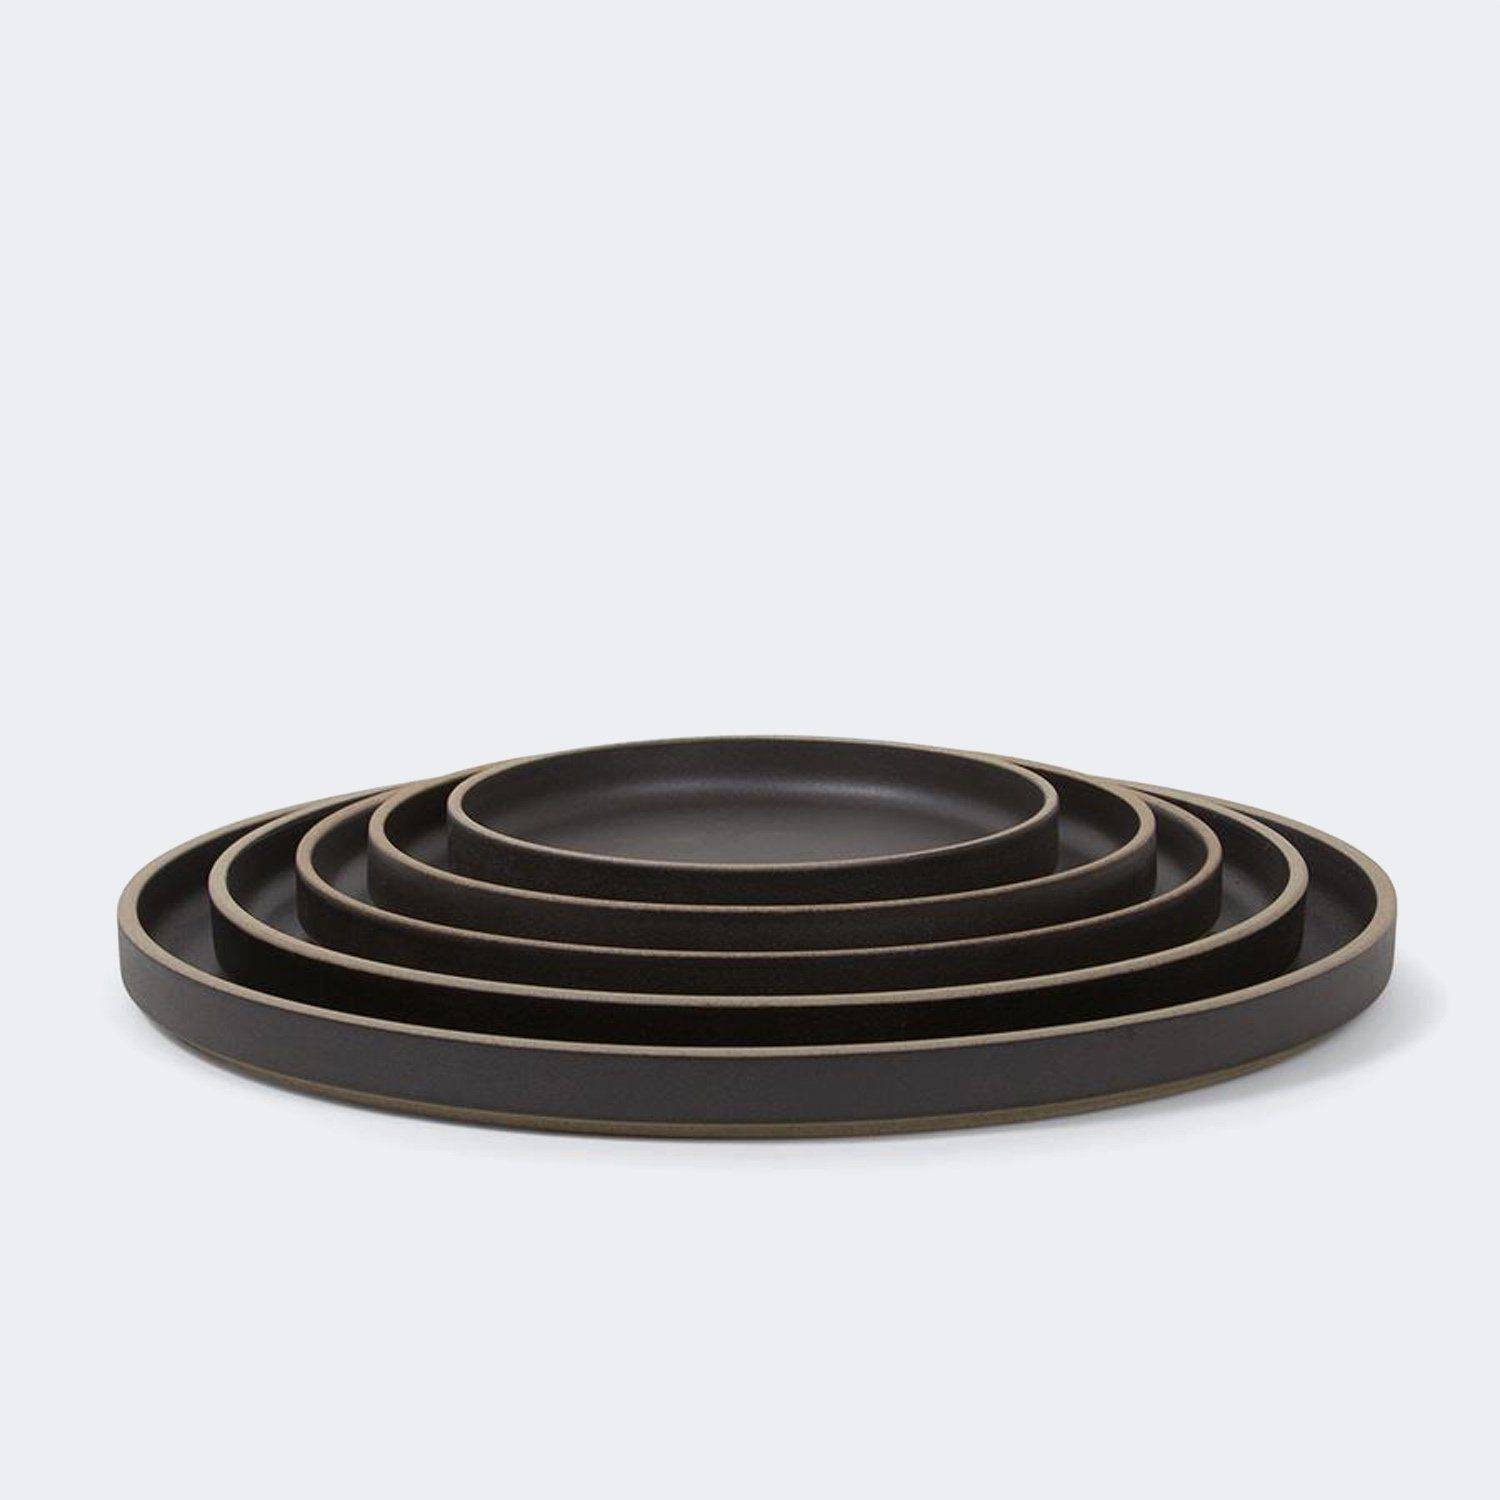 https://cdn.shopify.com/s/files/1/1527/1715/products/hasami-porcelain-plate-in-black-kanso-352686.jpg?v=1686238981&width=1500